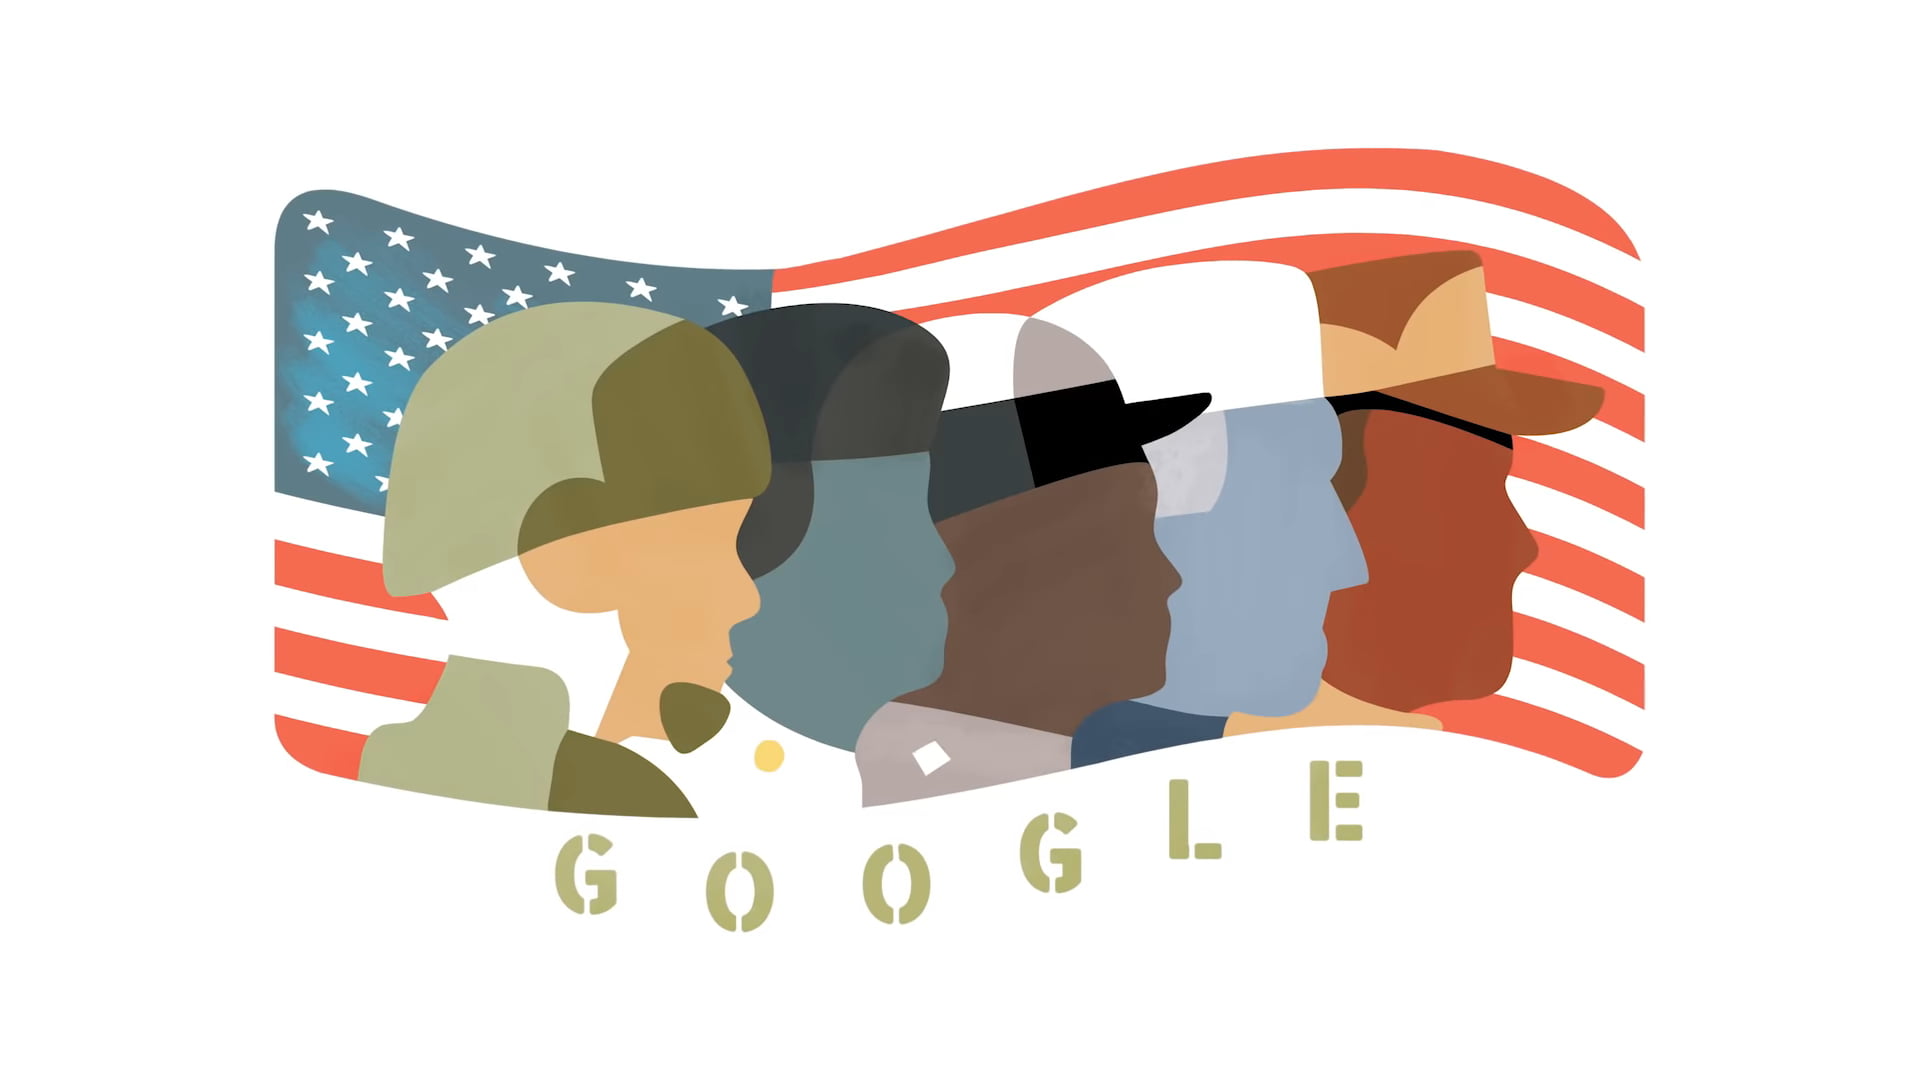 Google paid a touching tribute to veterans with a special Doodle